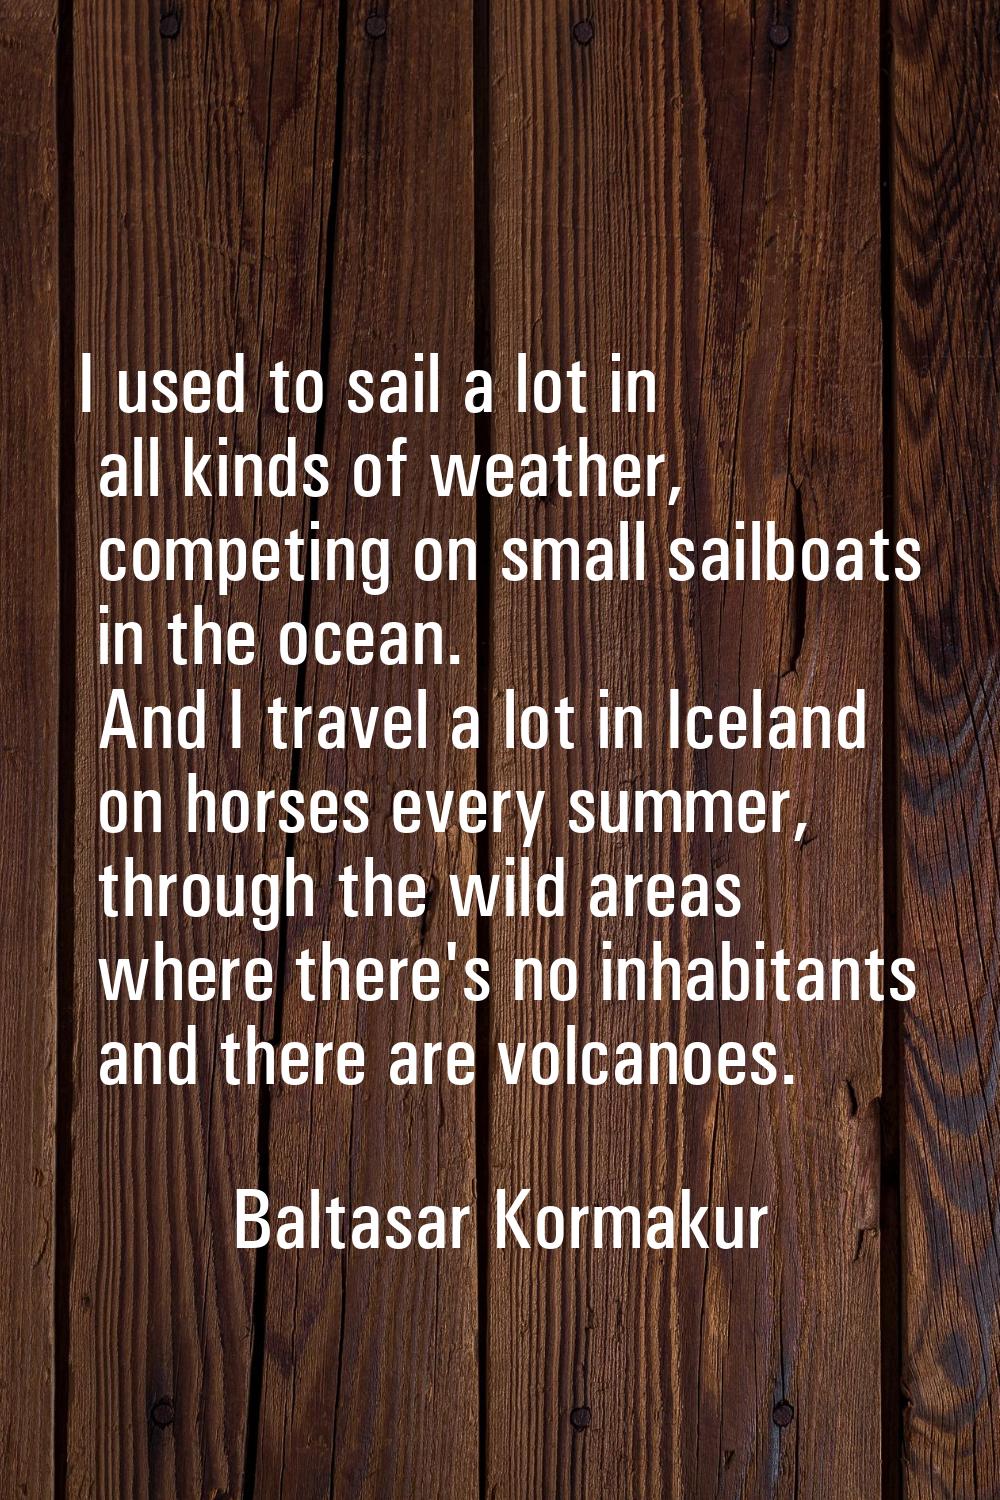 I used to sail a lot in all kinds of weather, competing on small sailboats in the ocean. And I trav